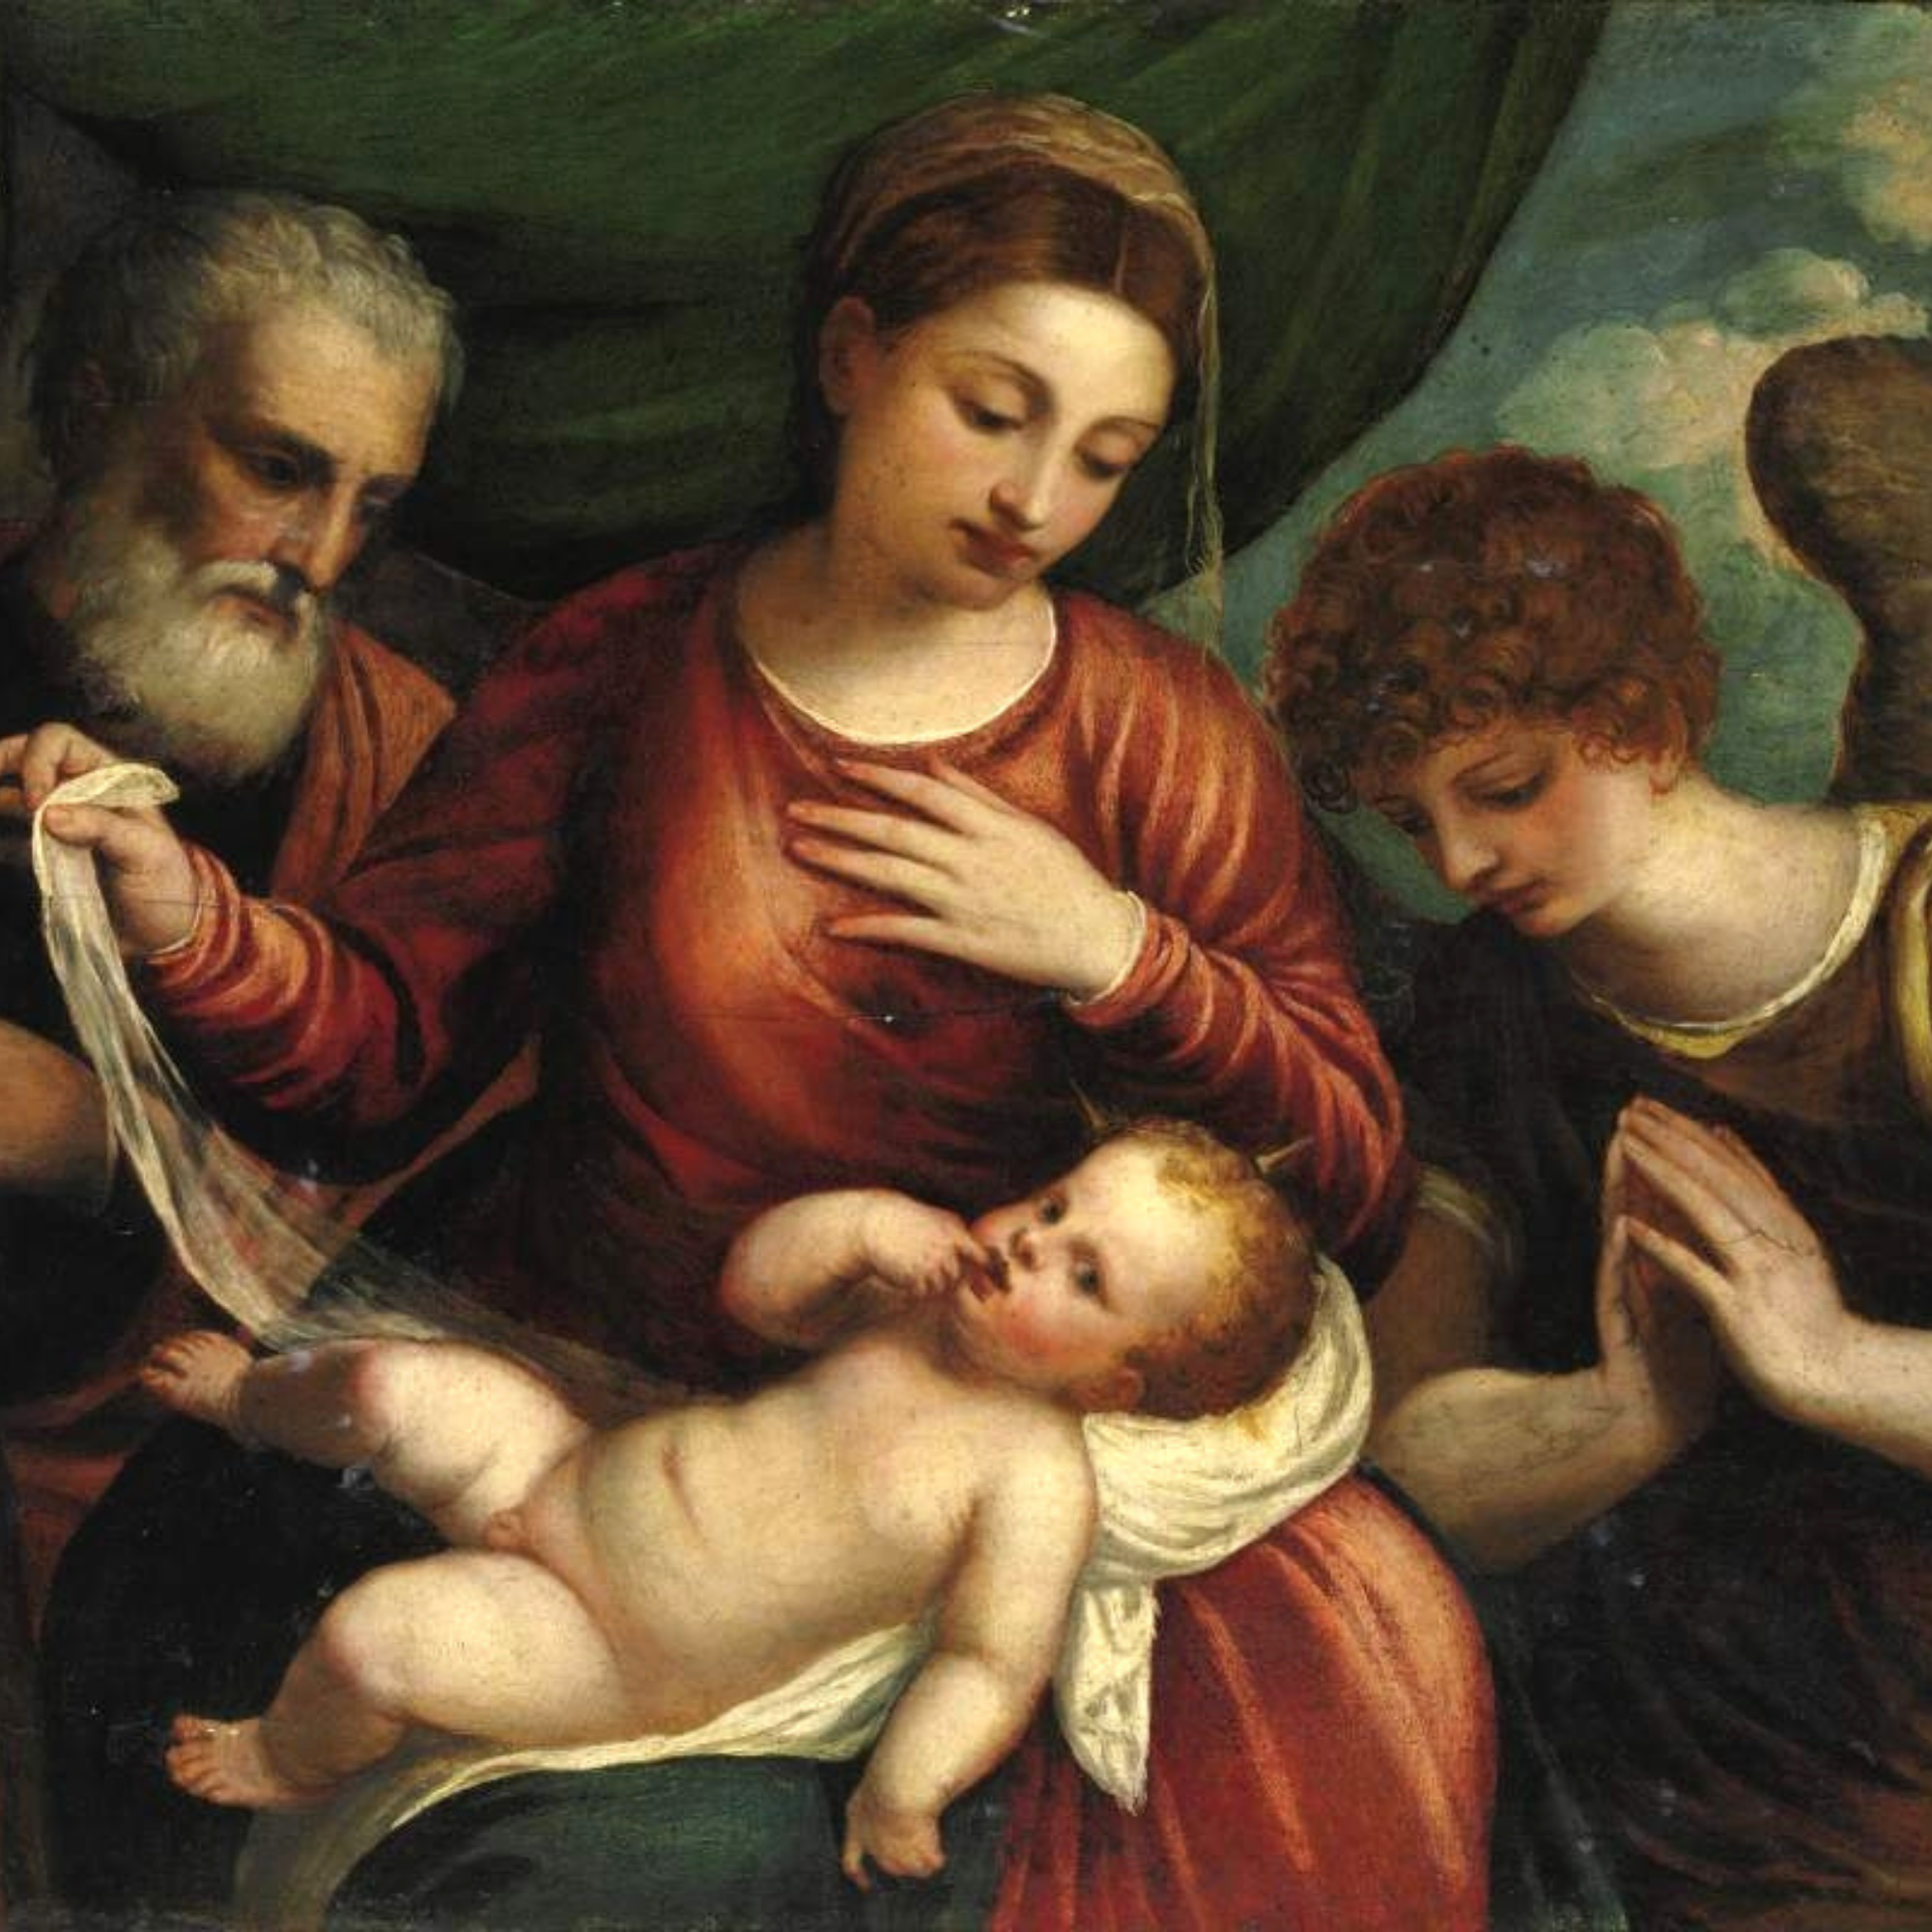 St Joseph in the Lives of Jesus & Mary